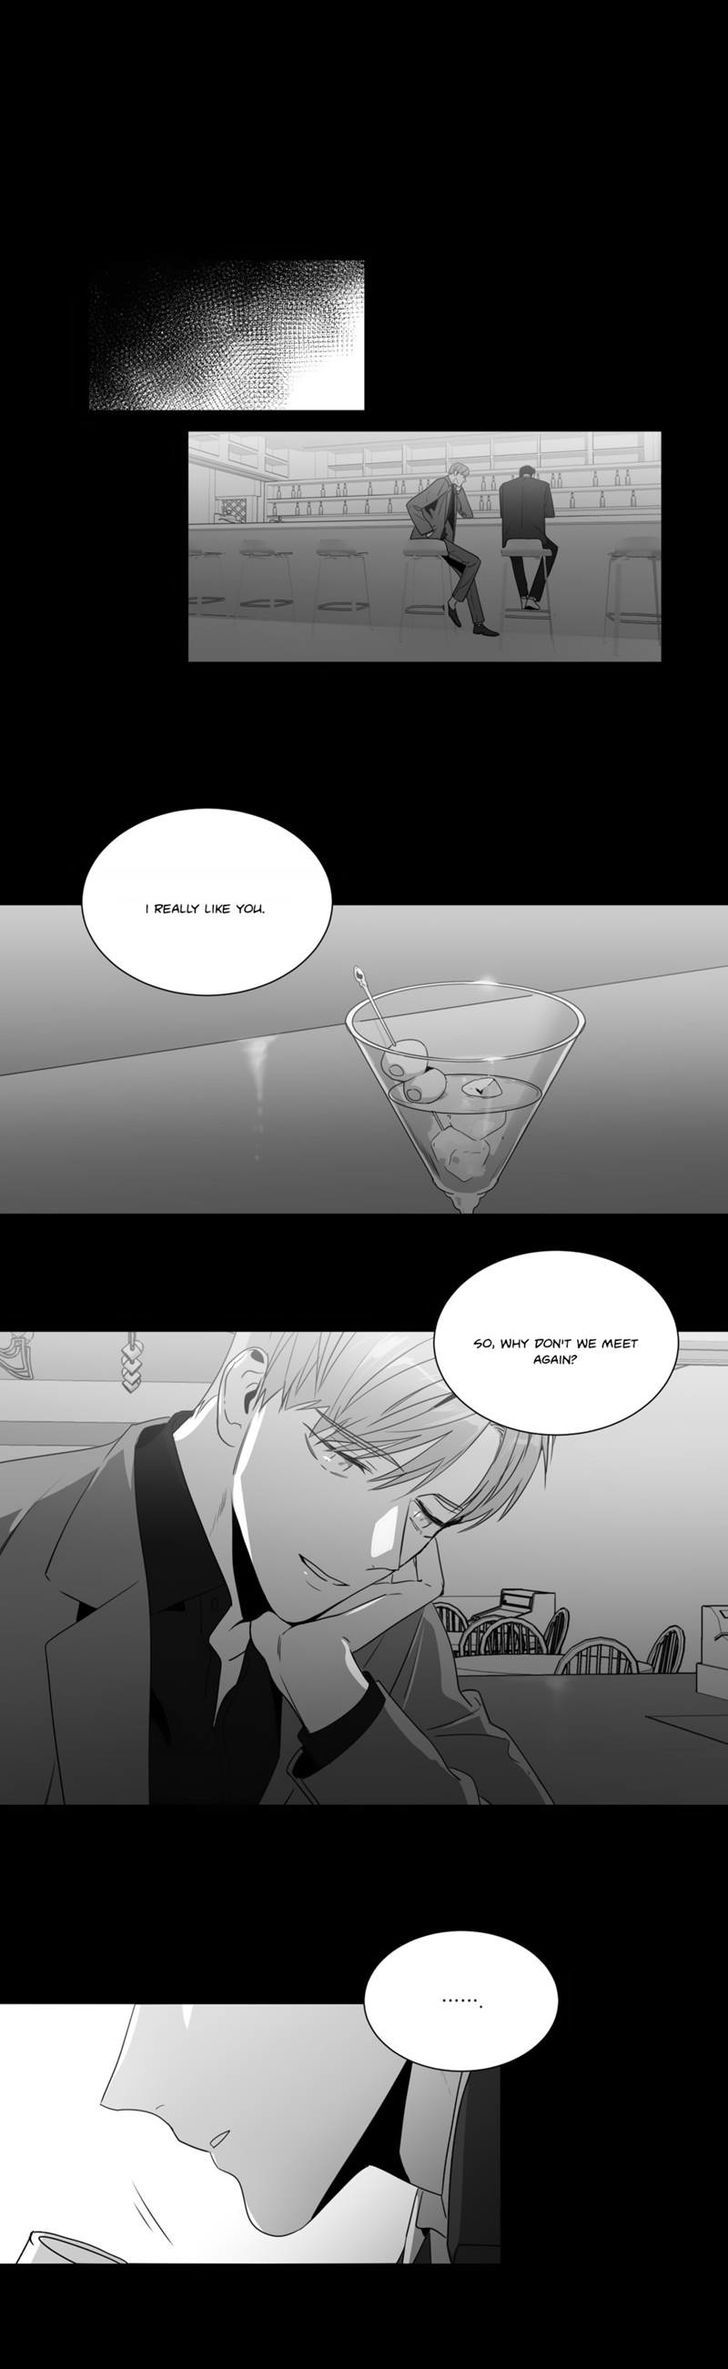 Lover Boy (Lezhin) Chapter 037 page 3